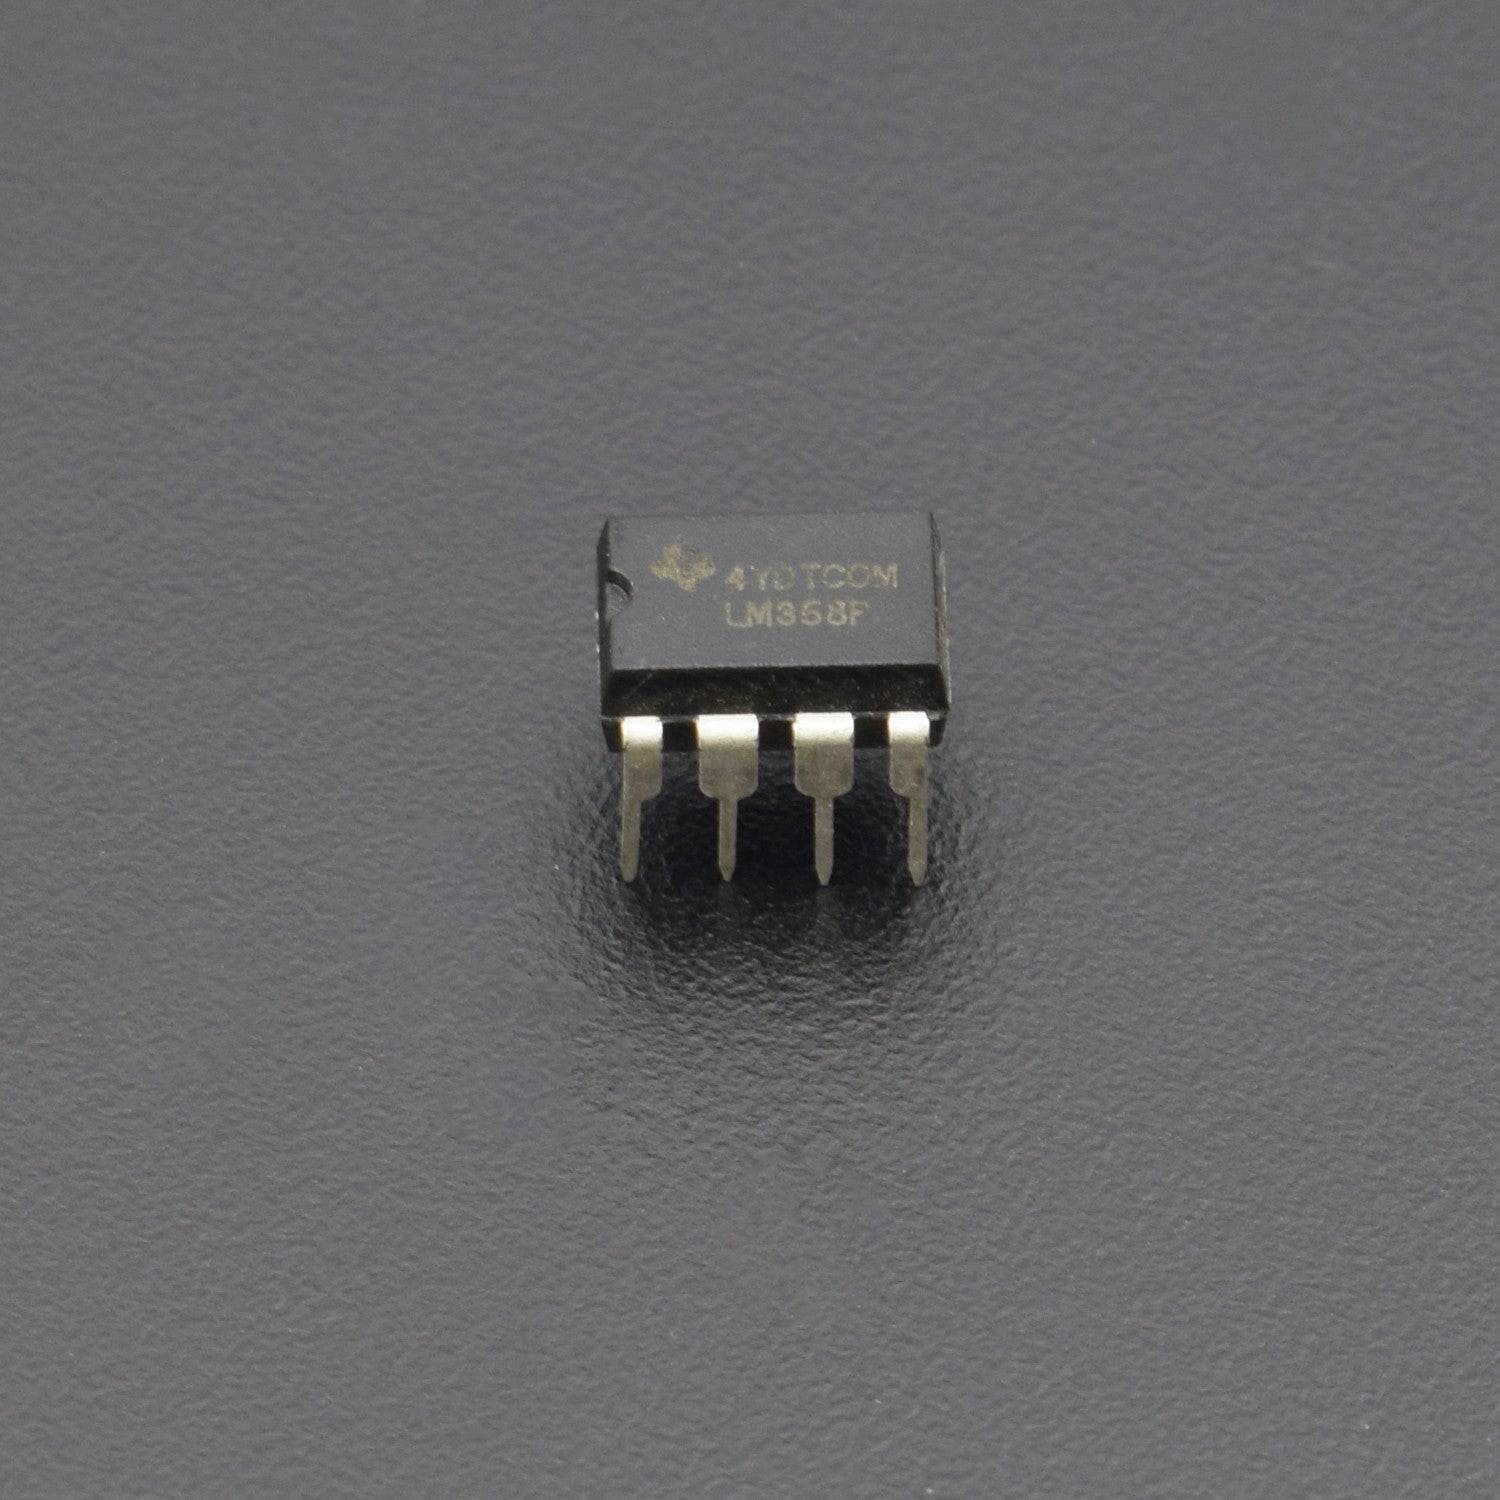 LM358 Operational Amplifier IC for basic projects - RS412 - REES52